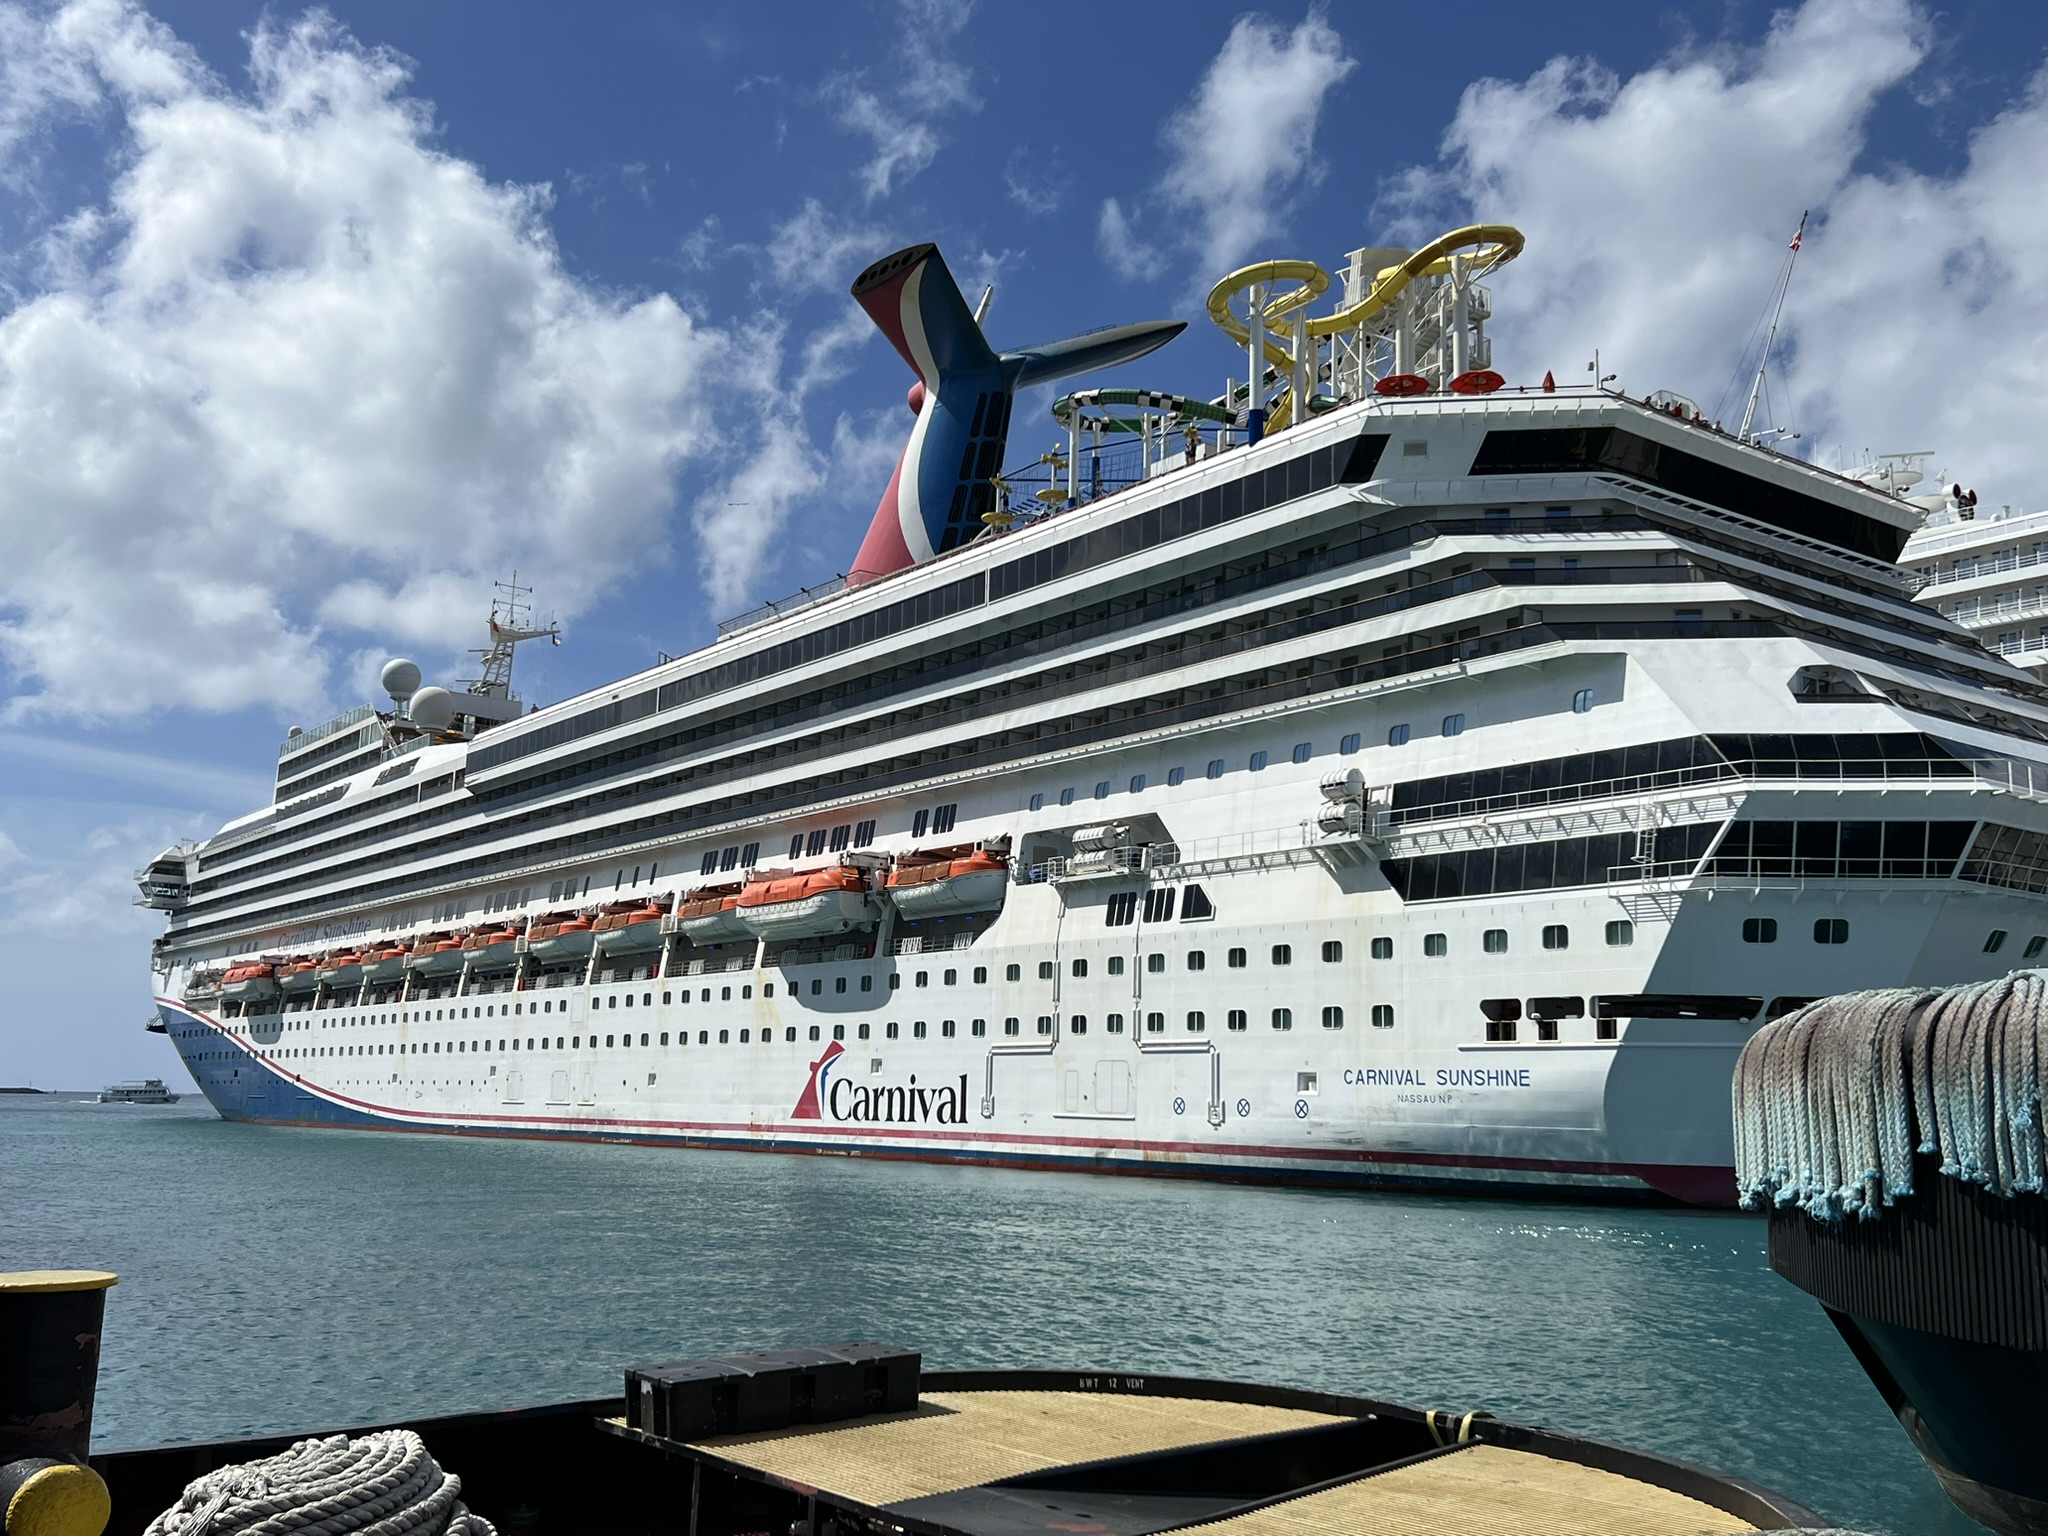 Cruise Ship Reviews – Cruise Ship Carnival Sunshine Review Including Likes and Dislikes of the Ship